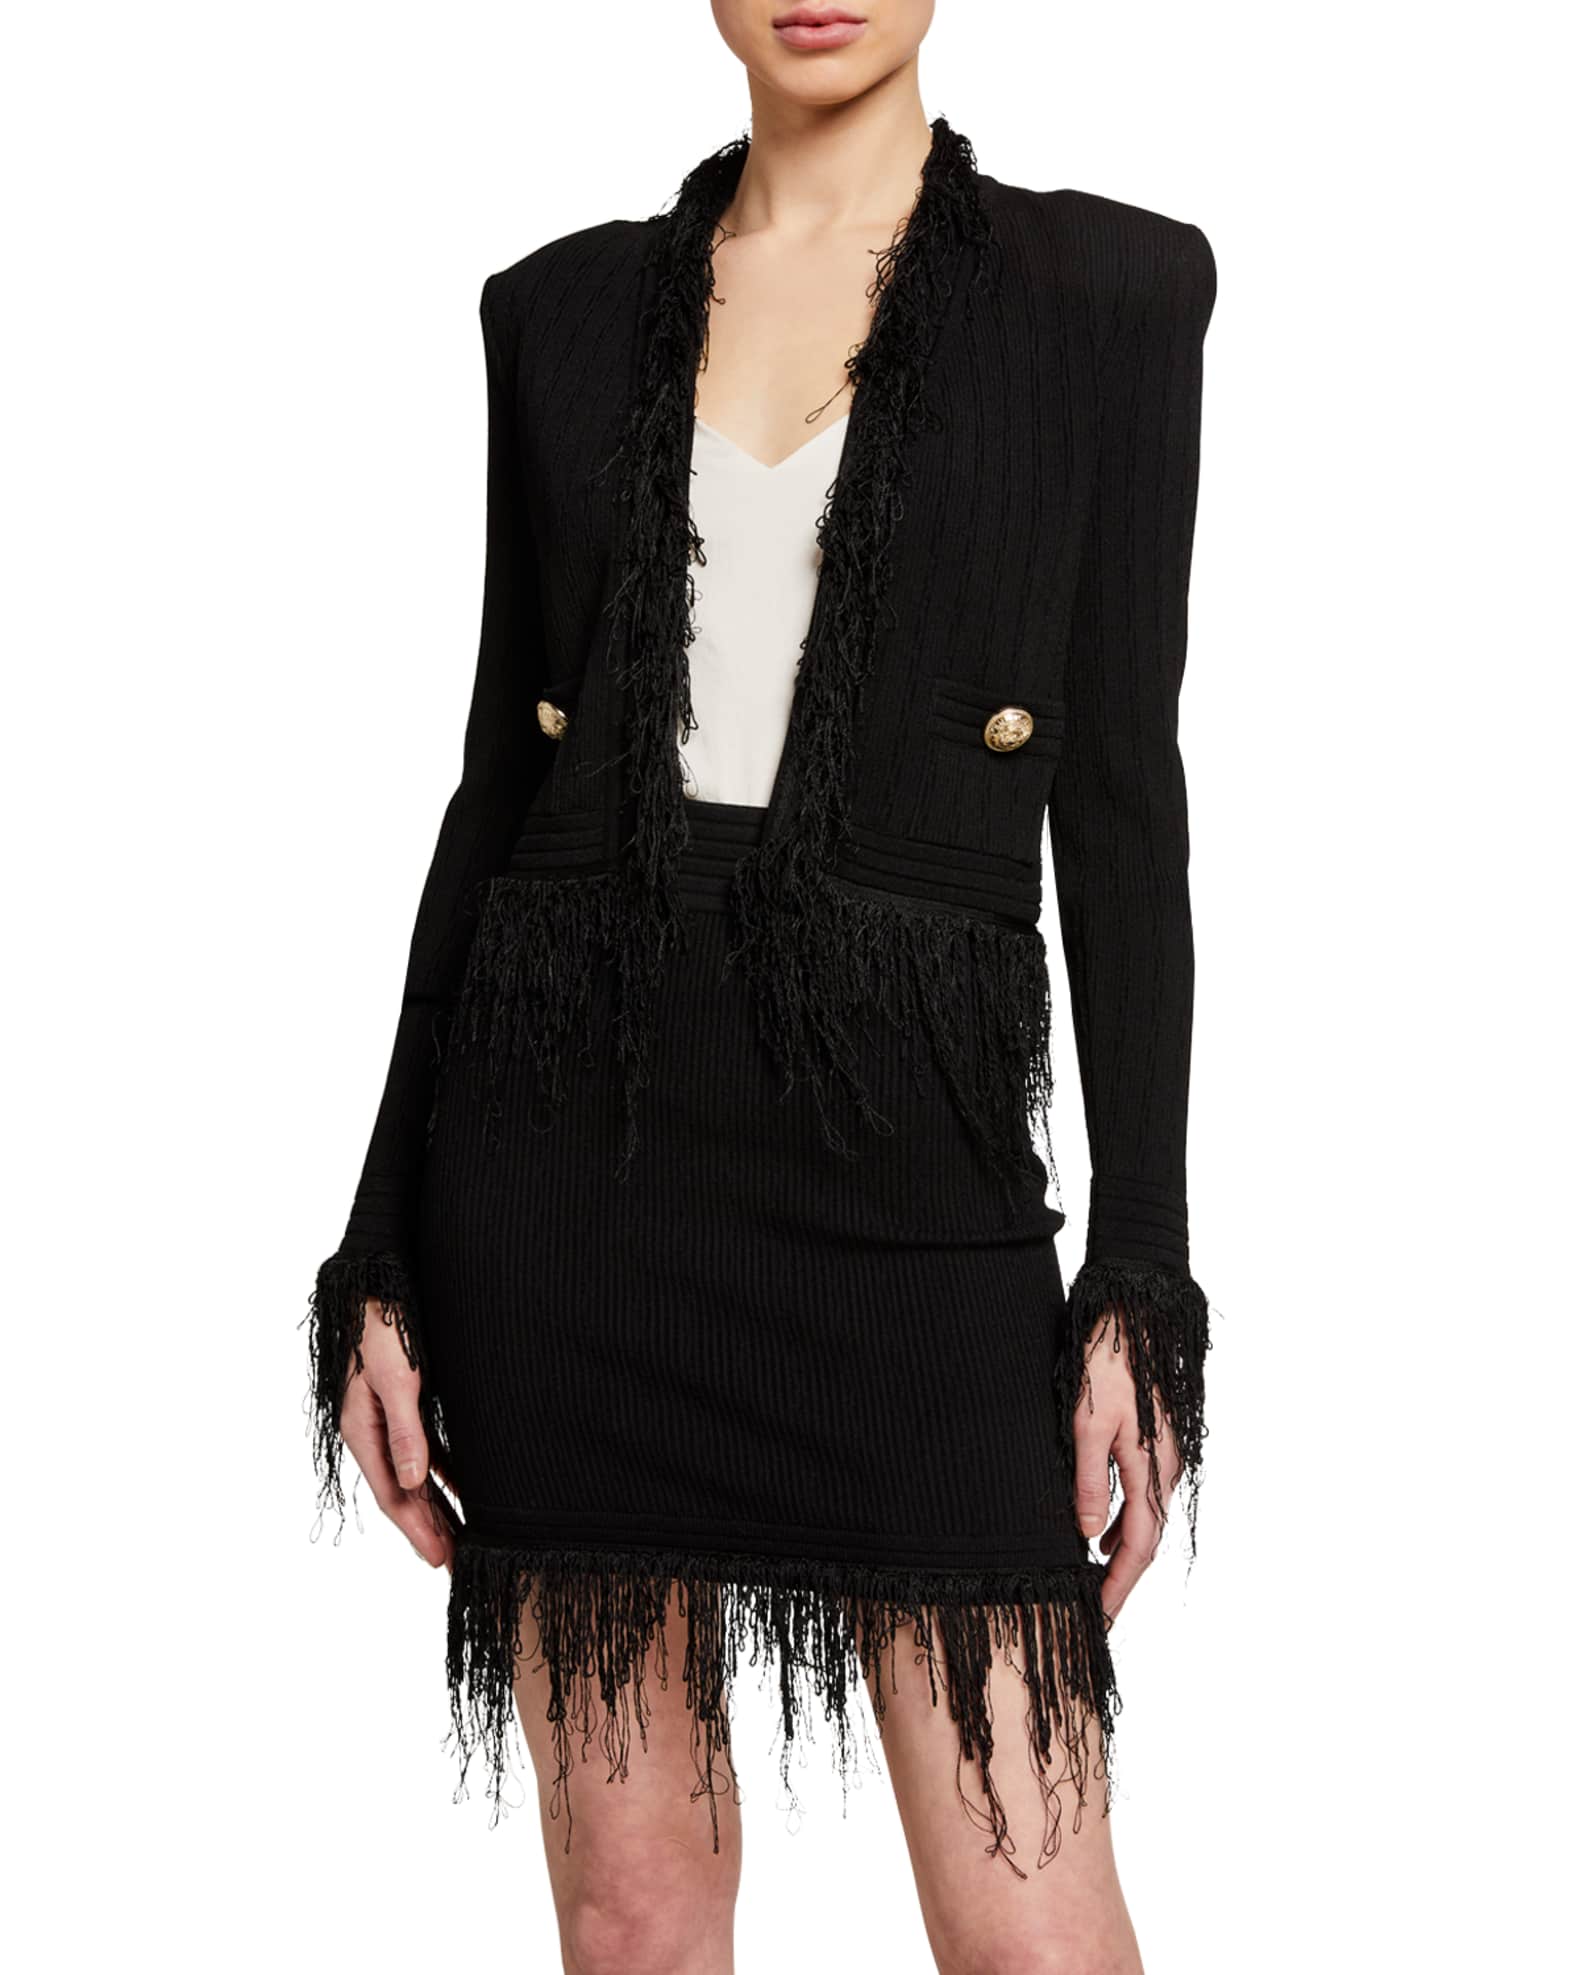 Fringed-Trim Crop Jacket and Matching Items | Neiman Marcus